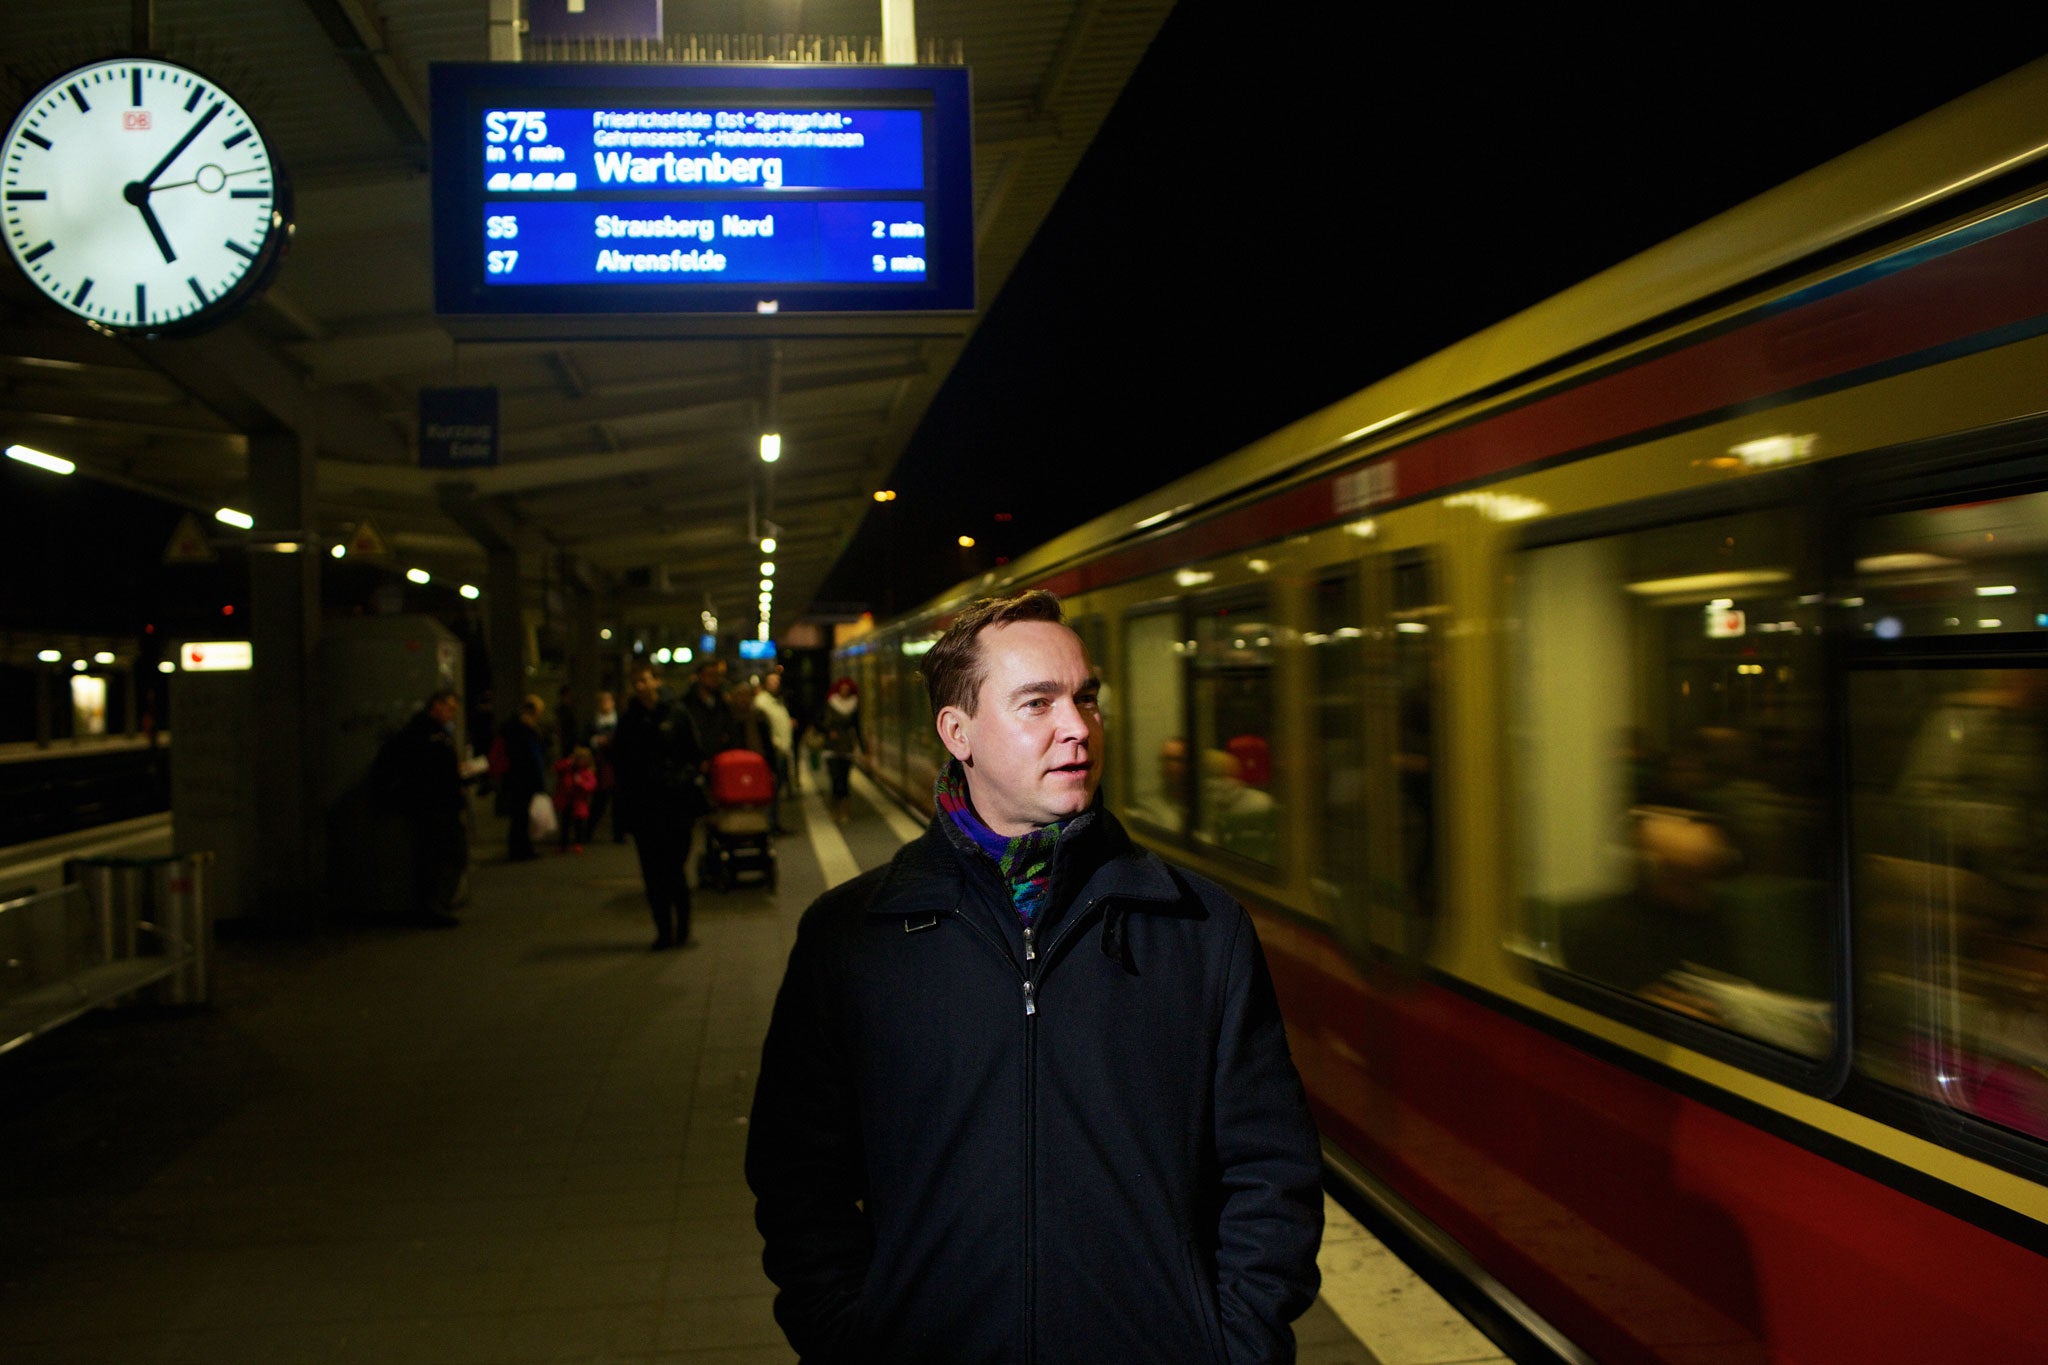 Frank Cieszynski at Lichtenberg Station where, in 1989, he escaped to West Germany